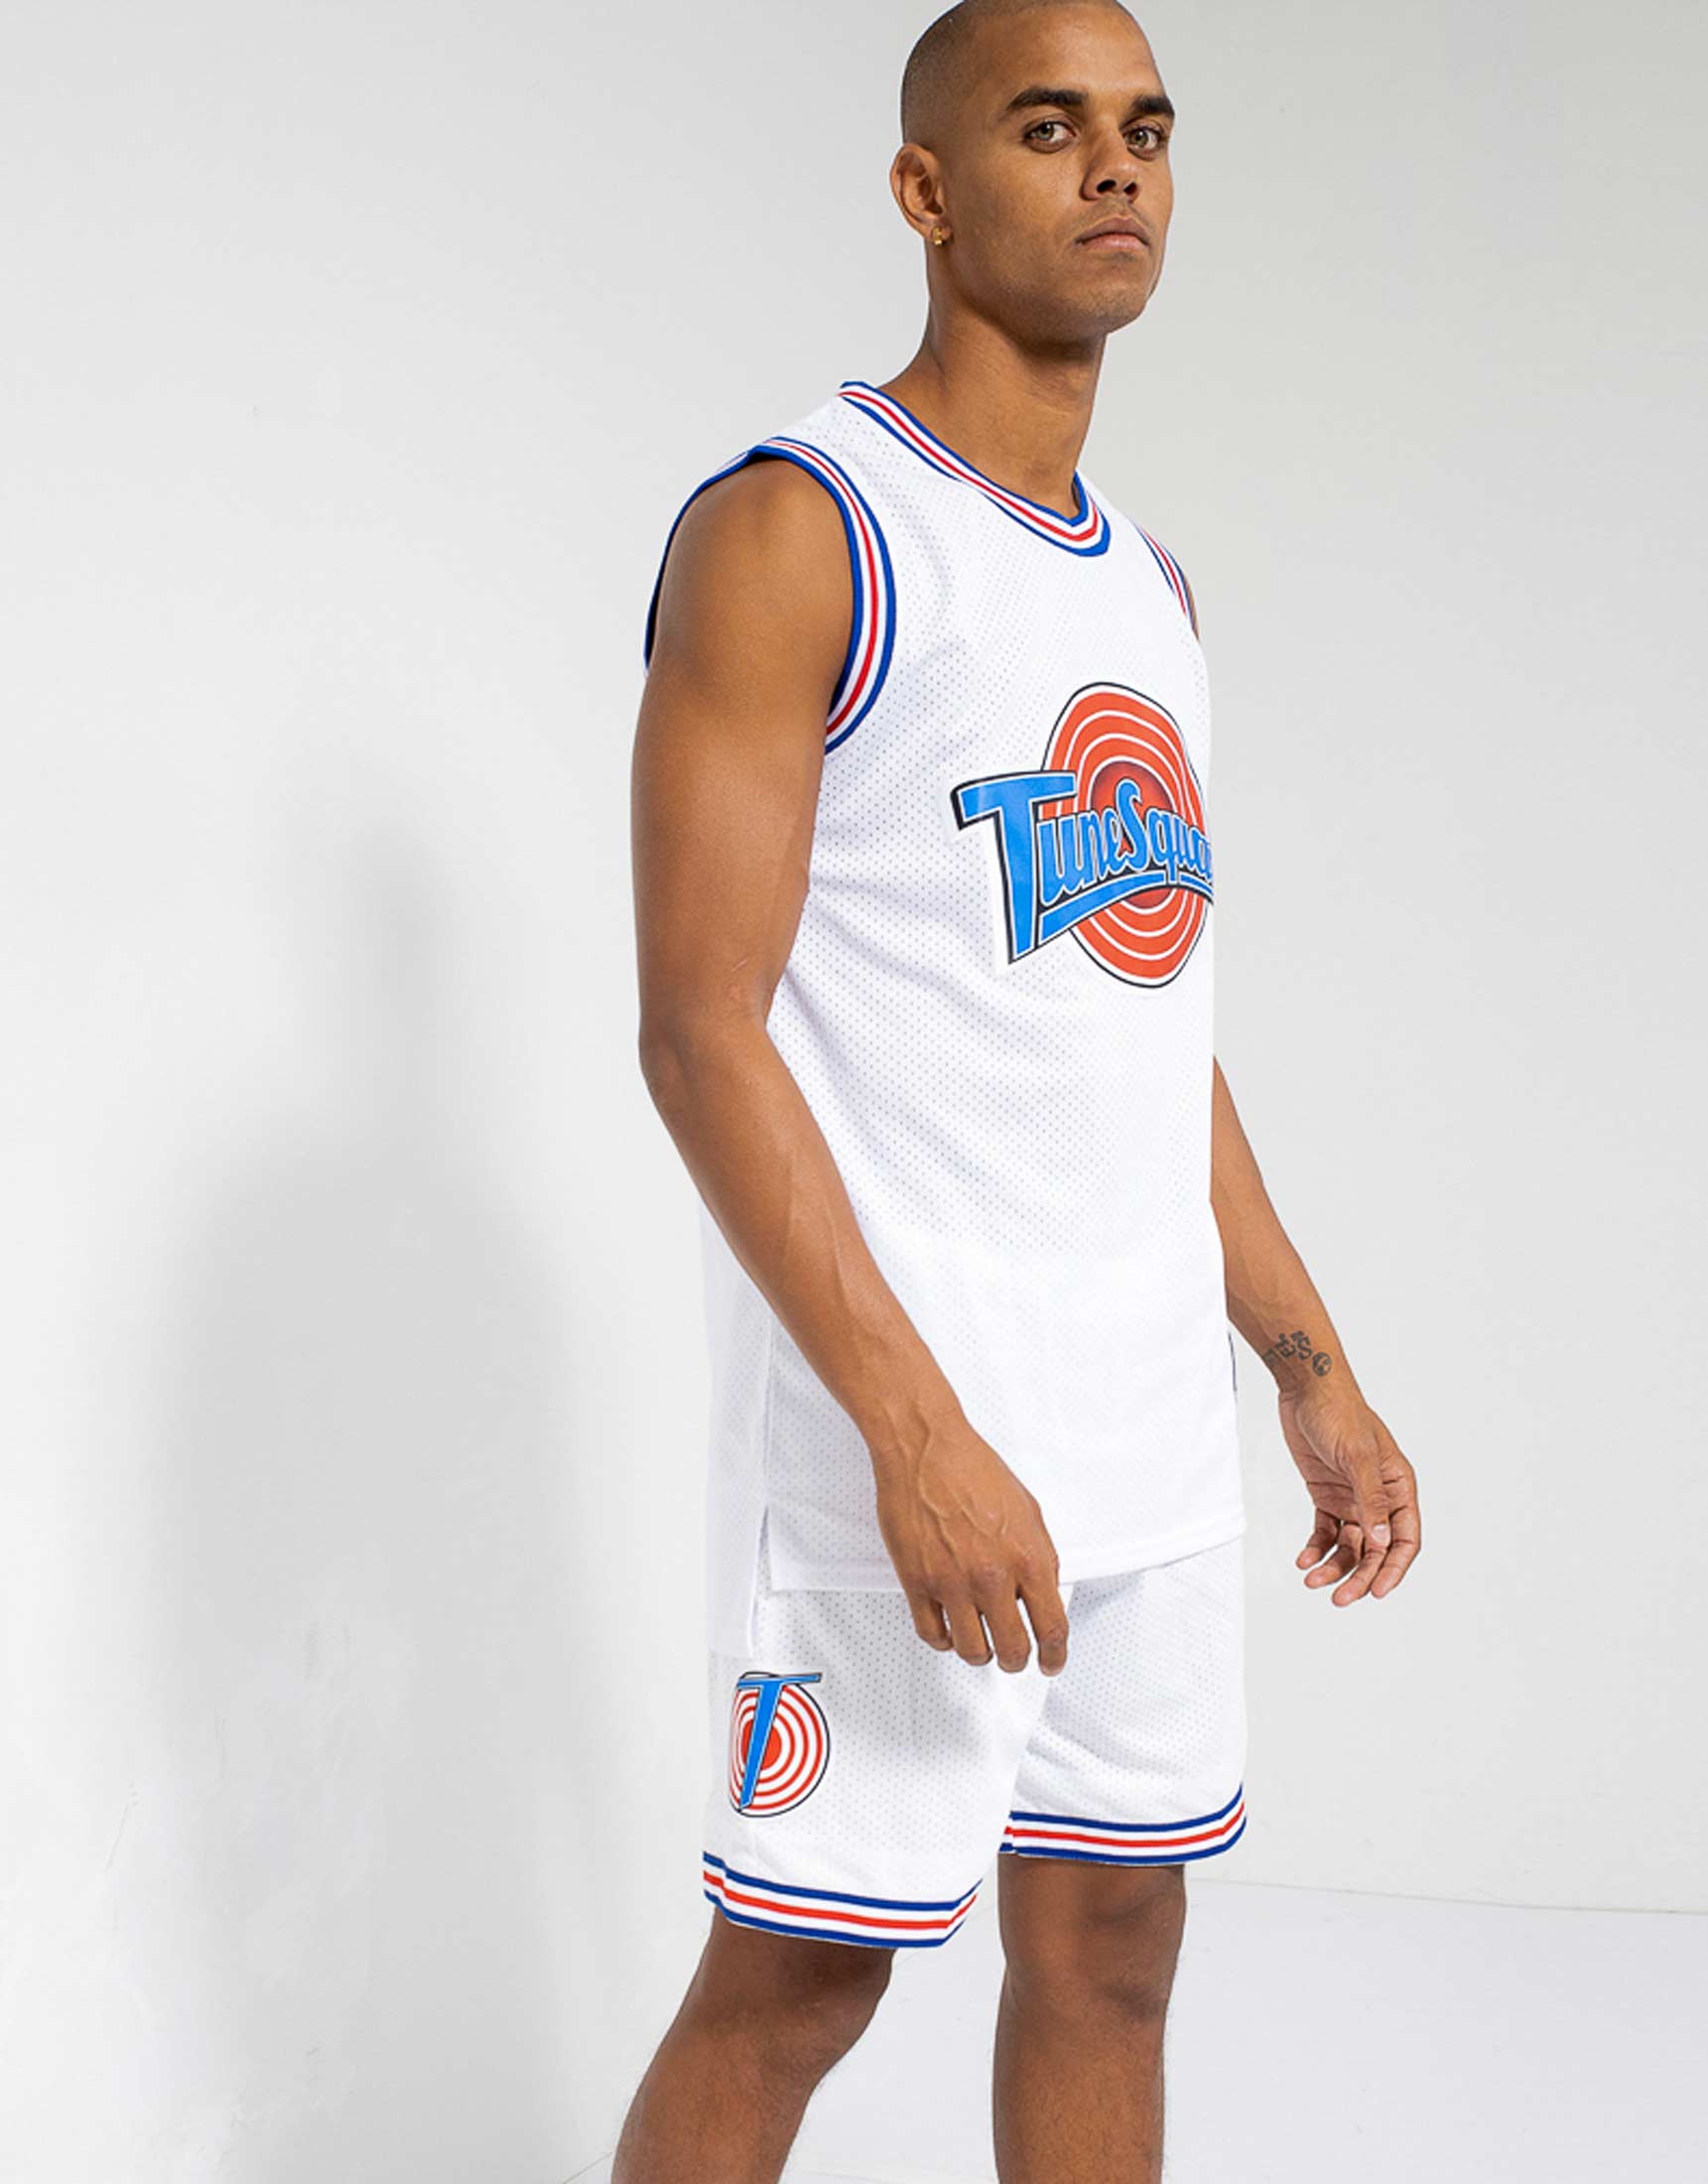 space jam Mens Classic Jersey - Tune Squad Monstars & Bugs Bunny Jersey  90’s Classic Mesh Tank Top at  Men’s Clothing store